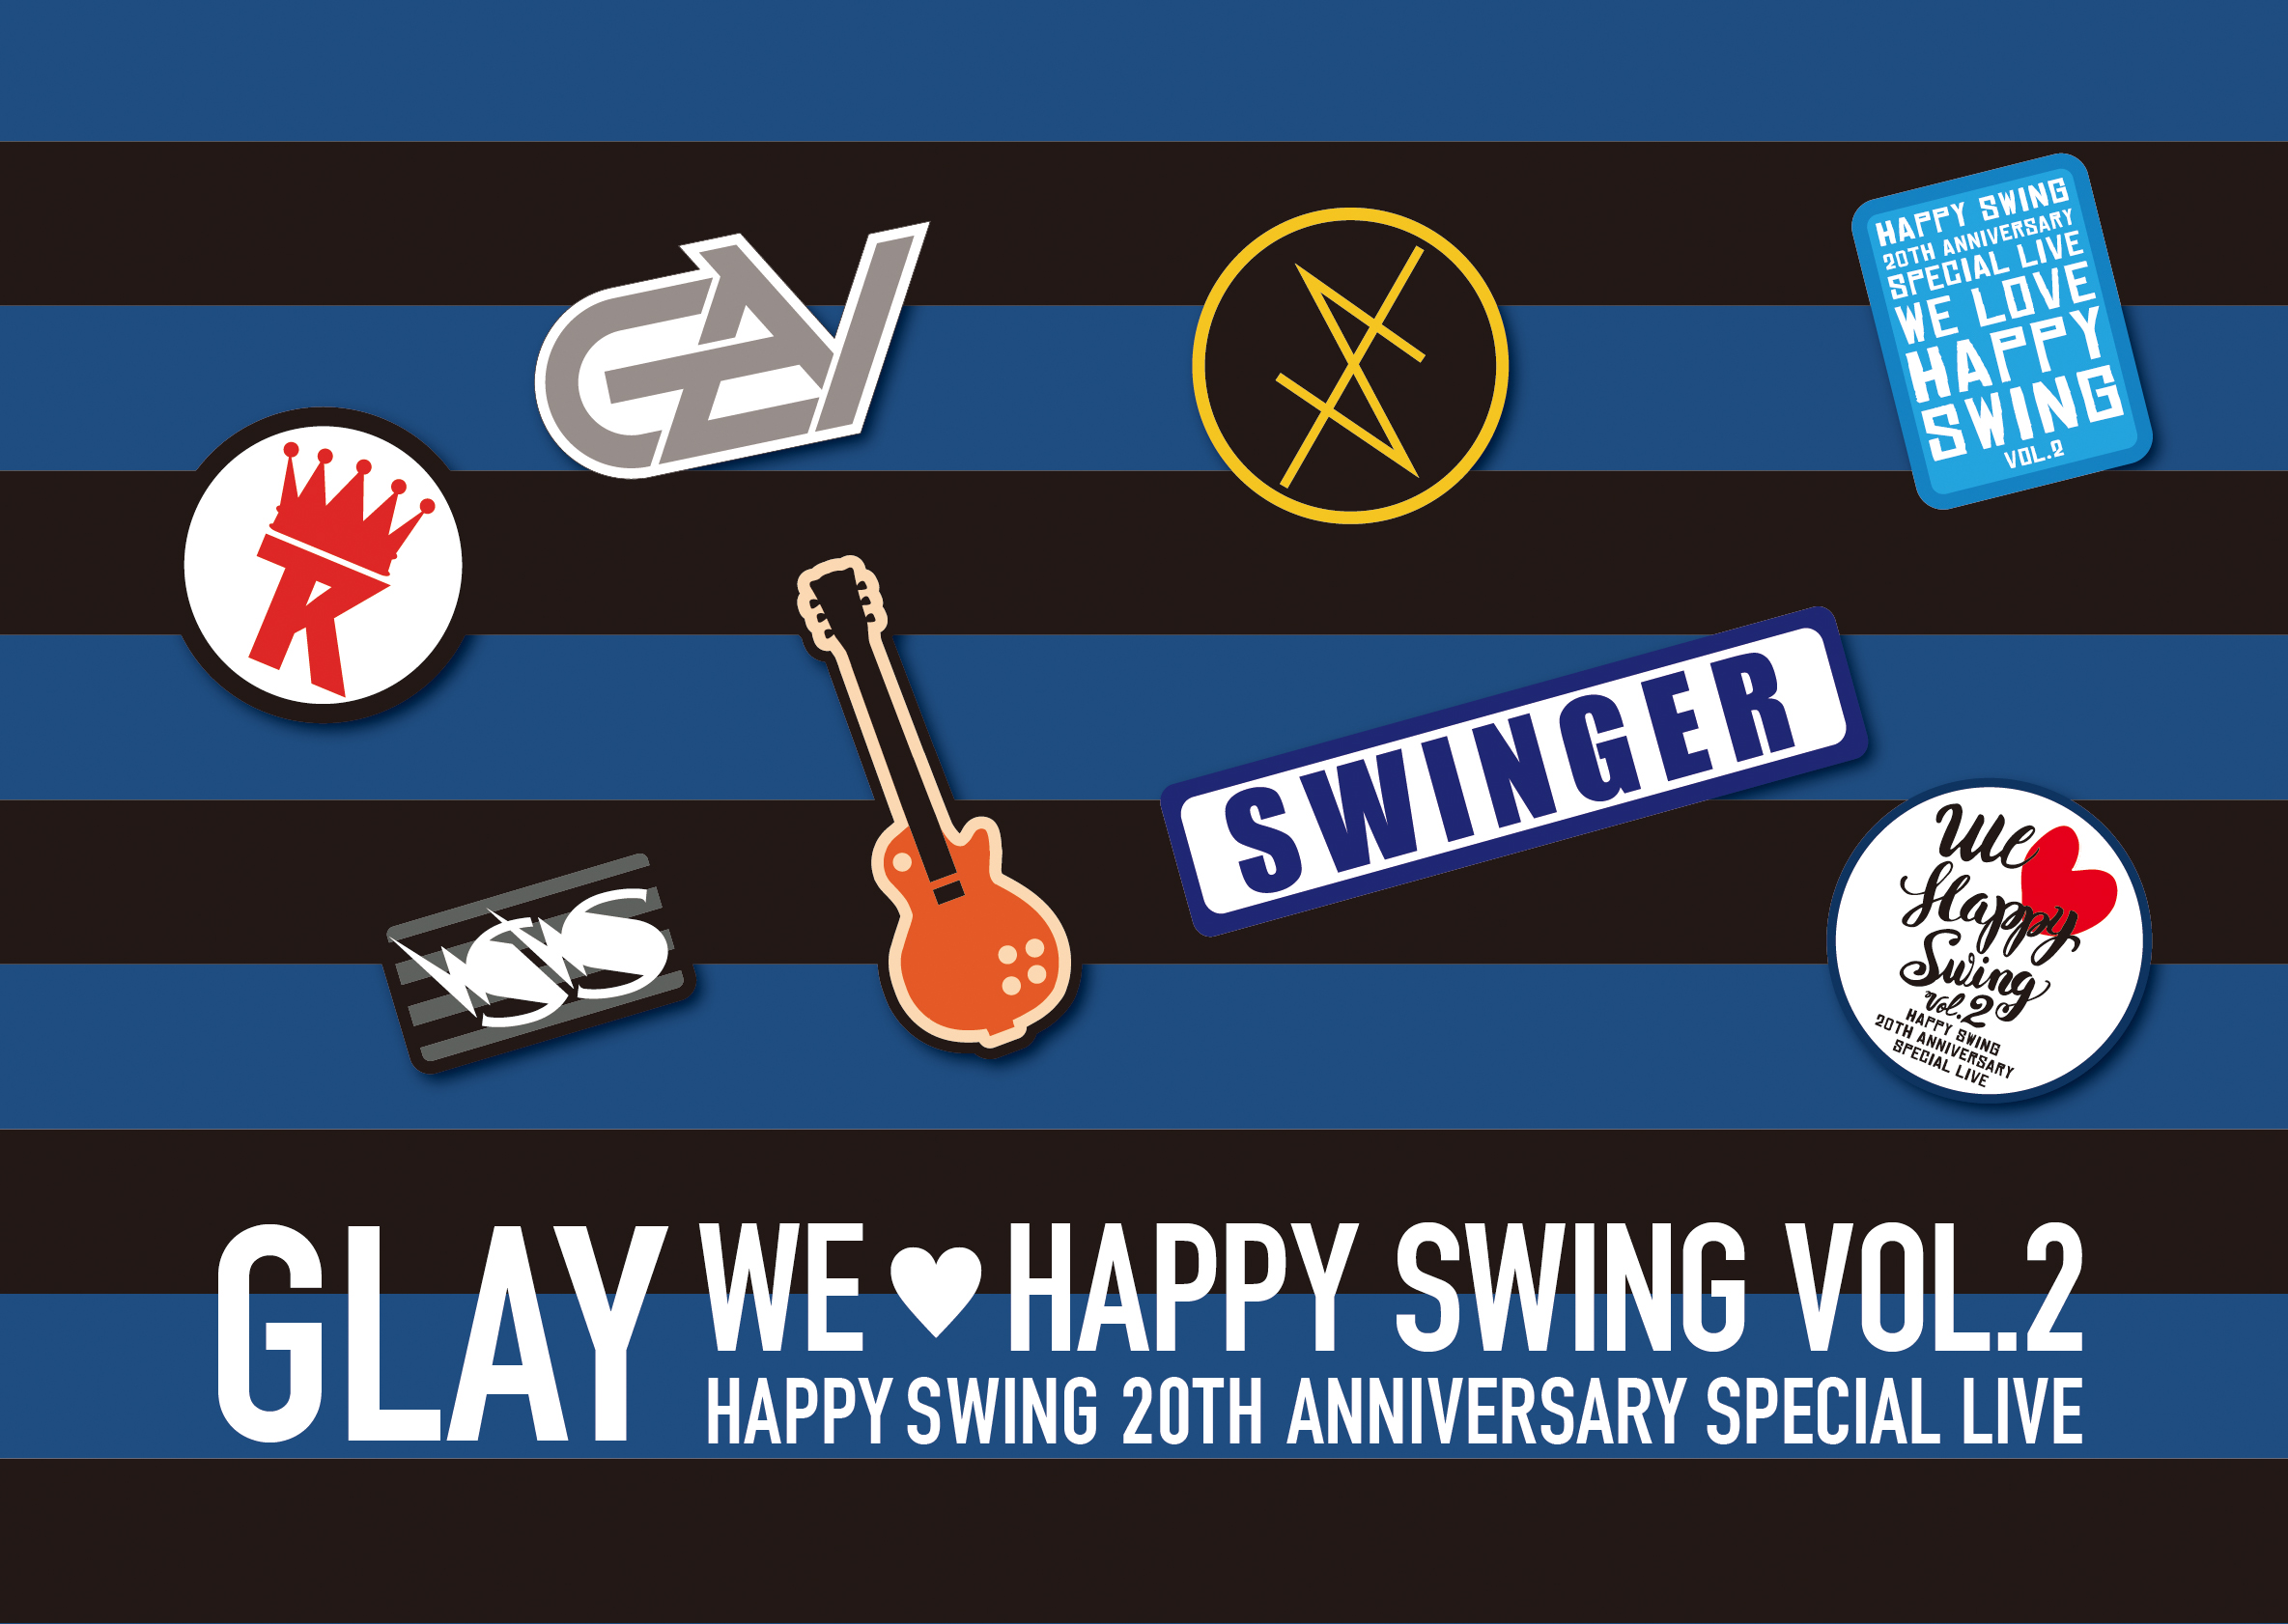 HAPPY SWING 20th Anniversary SPECIAL LIVE ～We♡Happy Swing～ Vol.2